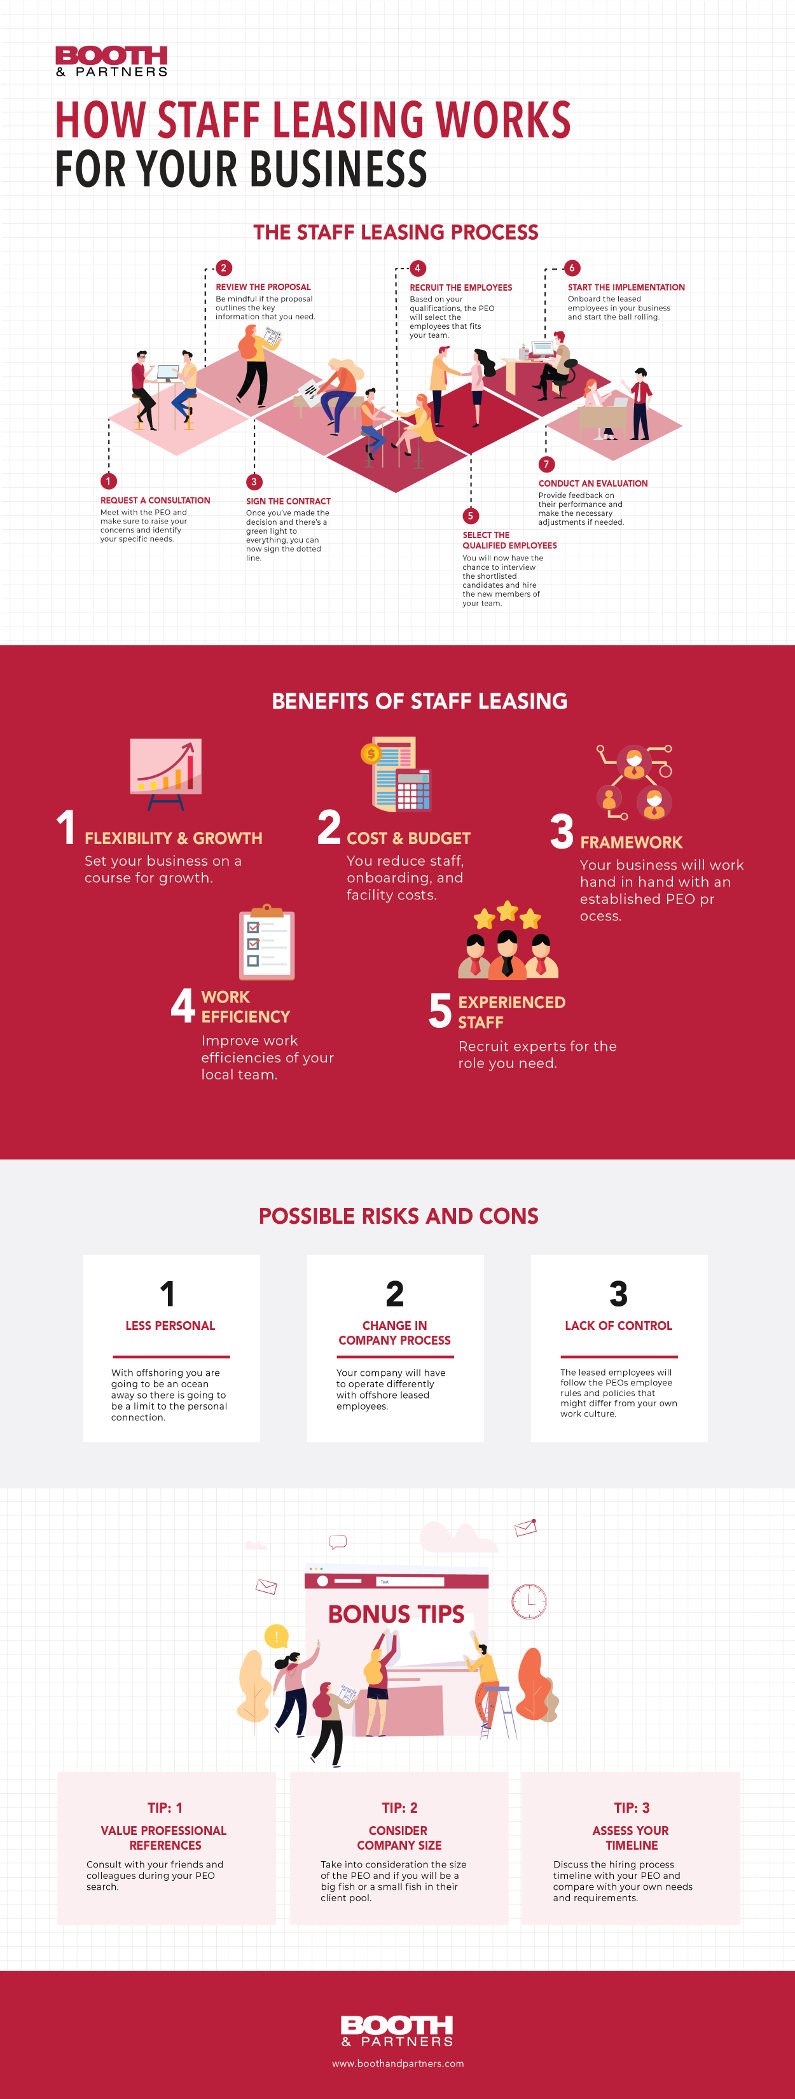 How staff leasing works - infographic